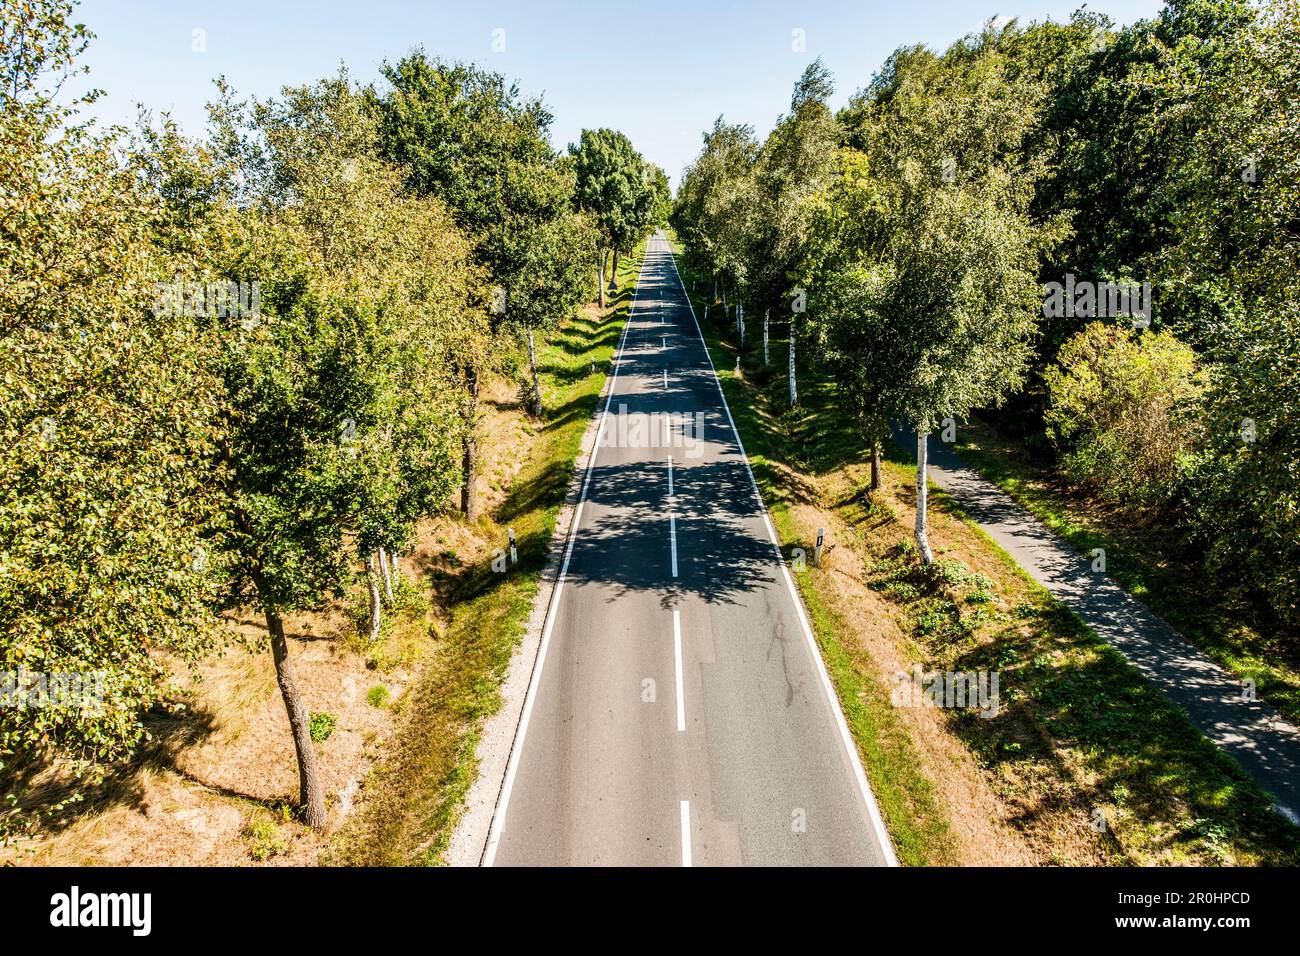 Road disappearing into the horizon, Radbruch, Winsen Luhe, Niedersachsen, north Germany, Germany Stock Photo